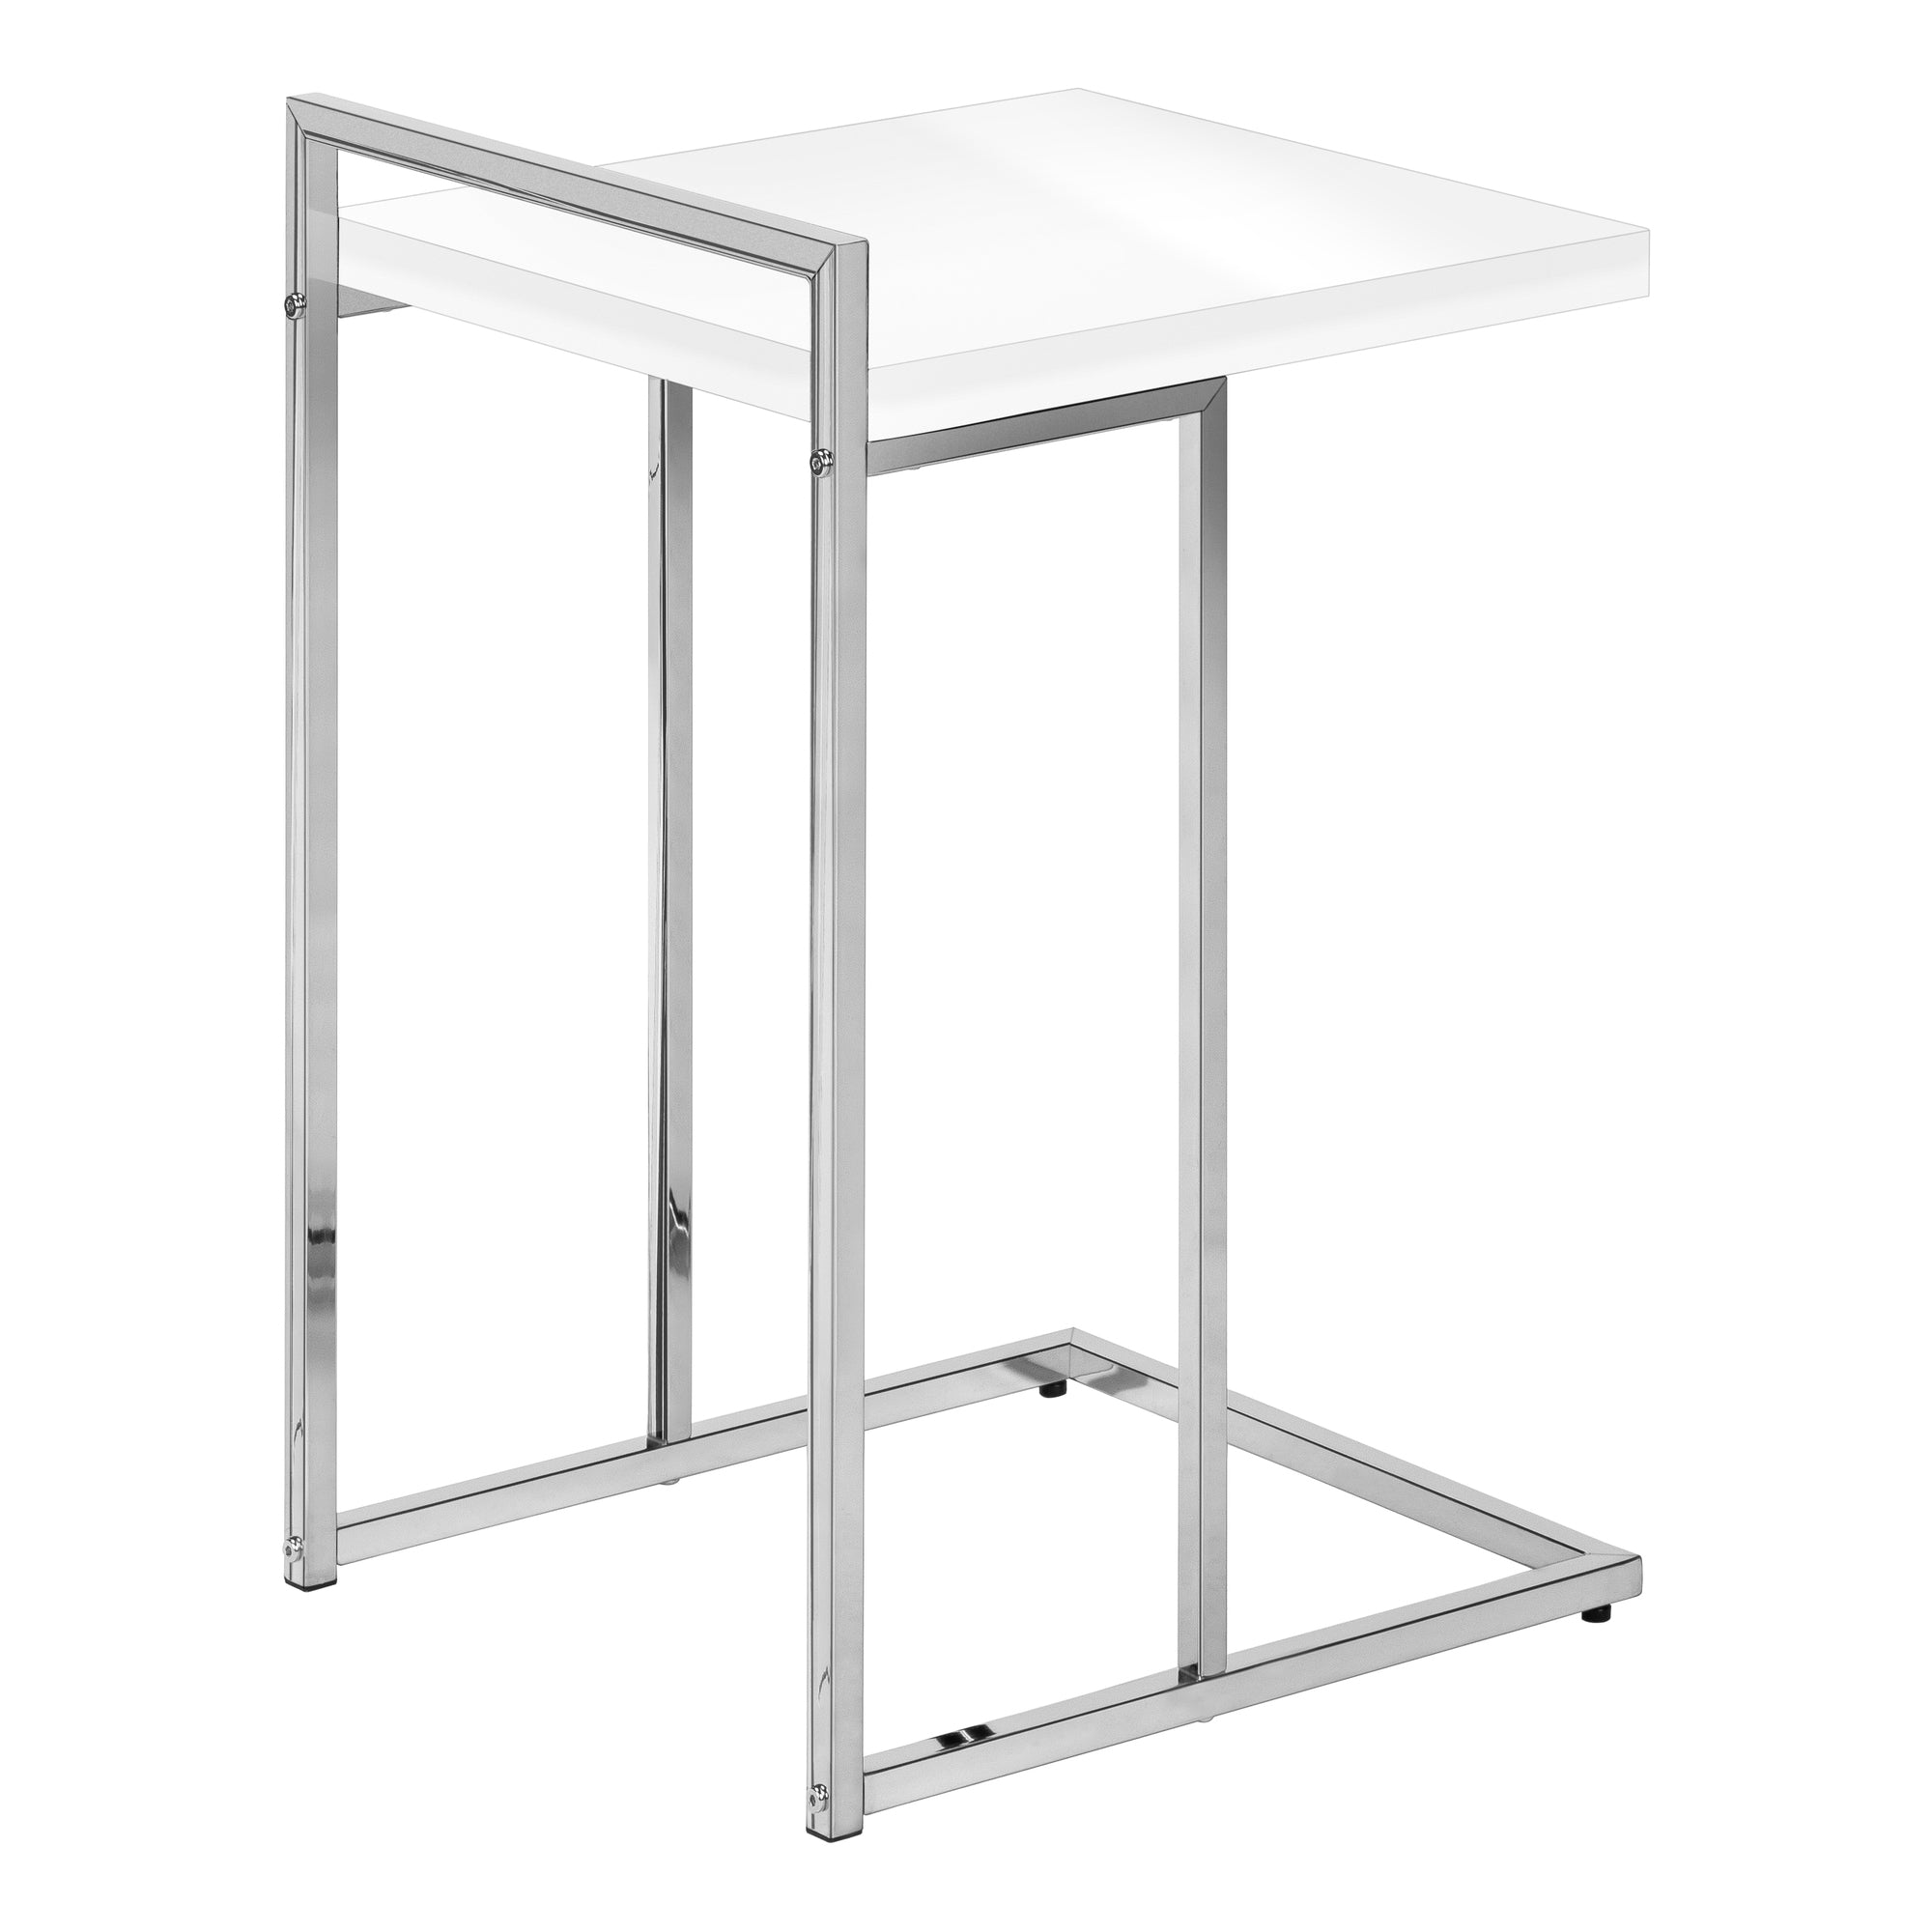 MN-853636    Accent Table, C-Shaped, End, Side, Snack, Living Room, Bedroom, Metal Frame, Laminate, Glossy White, Chrome, Contemporary, Modern